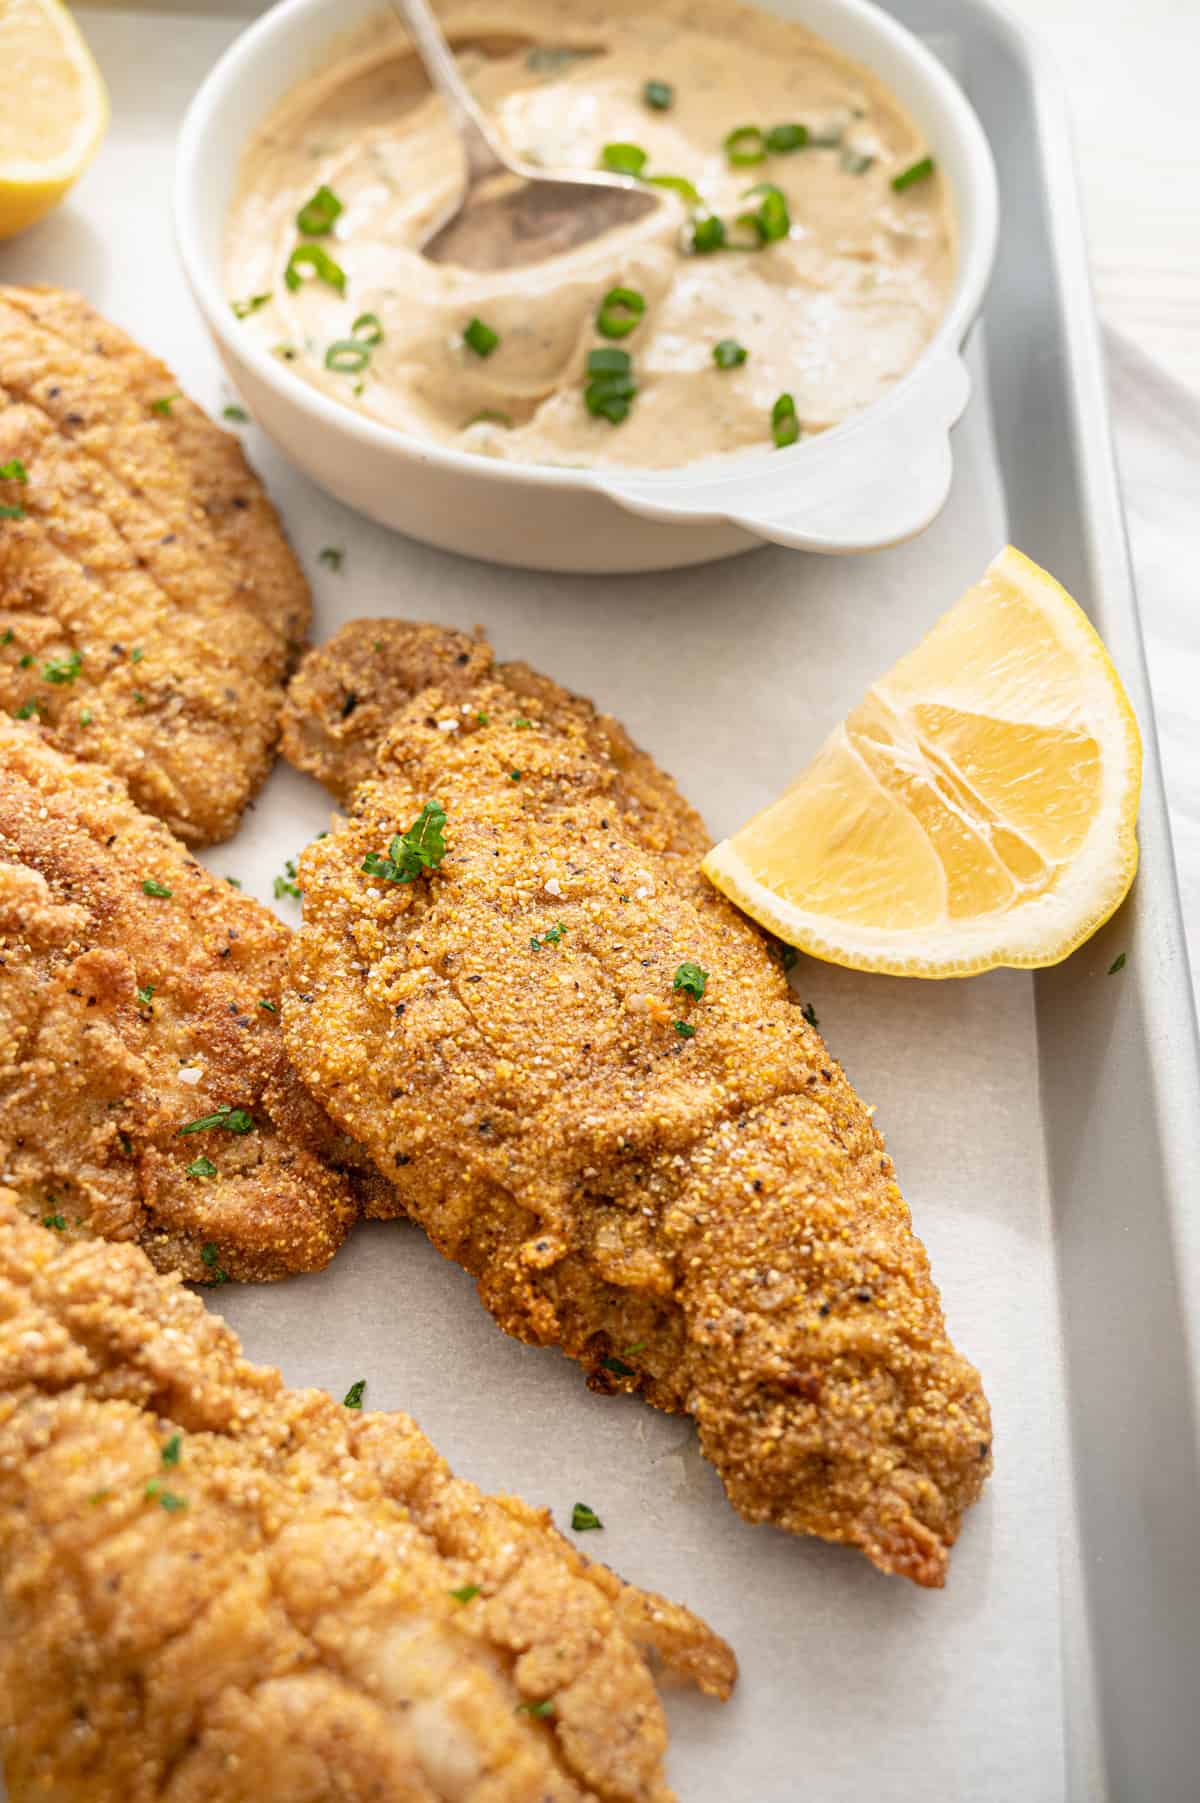 Fried catfish on parchment with remoulade sauce and lemon wedges.